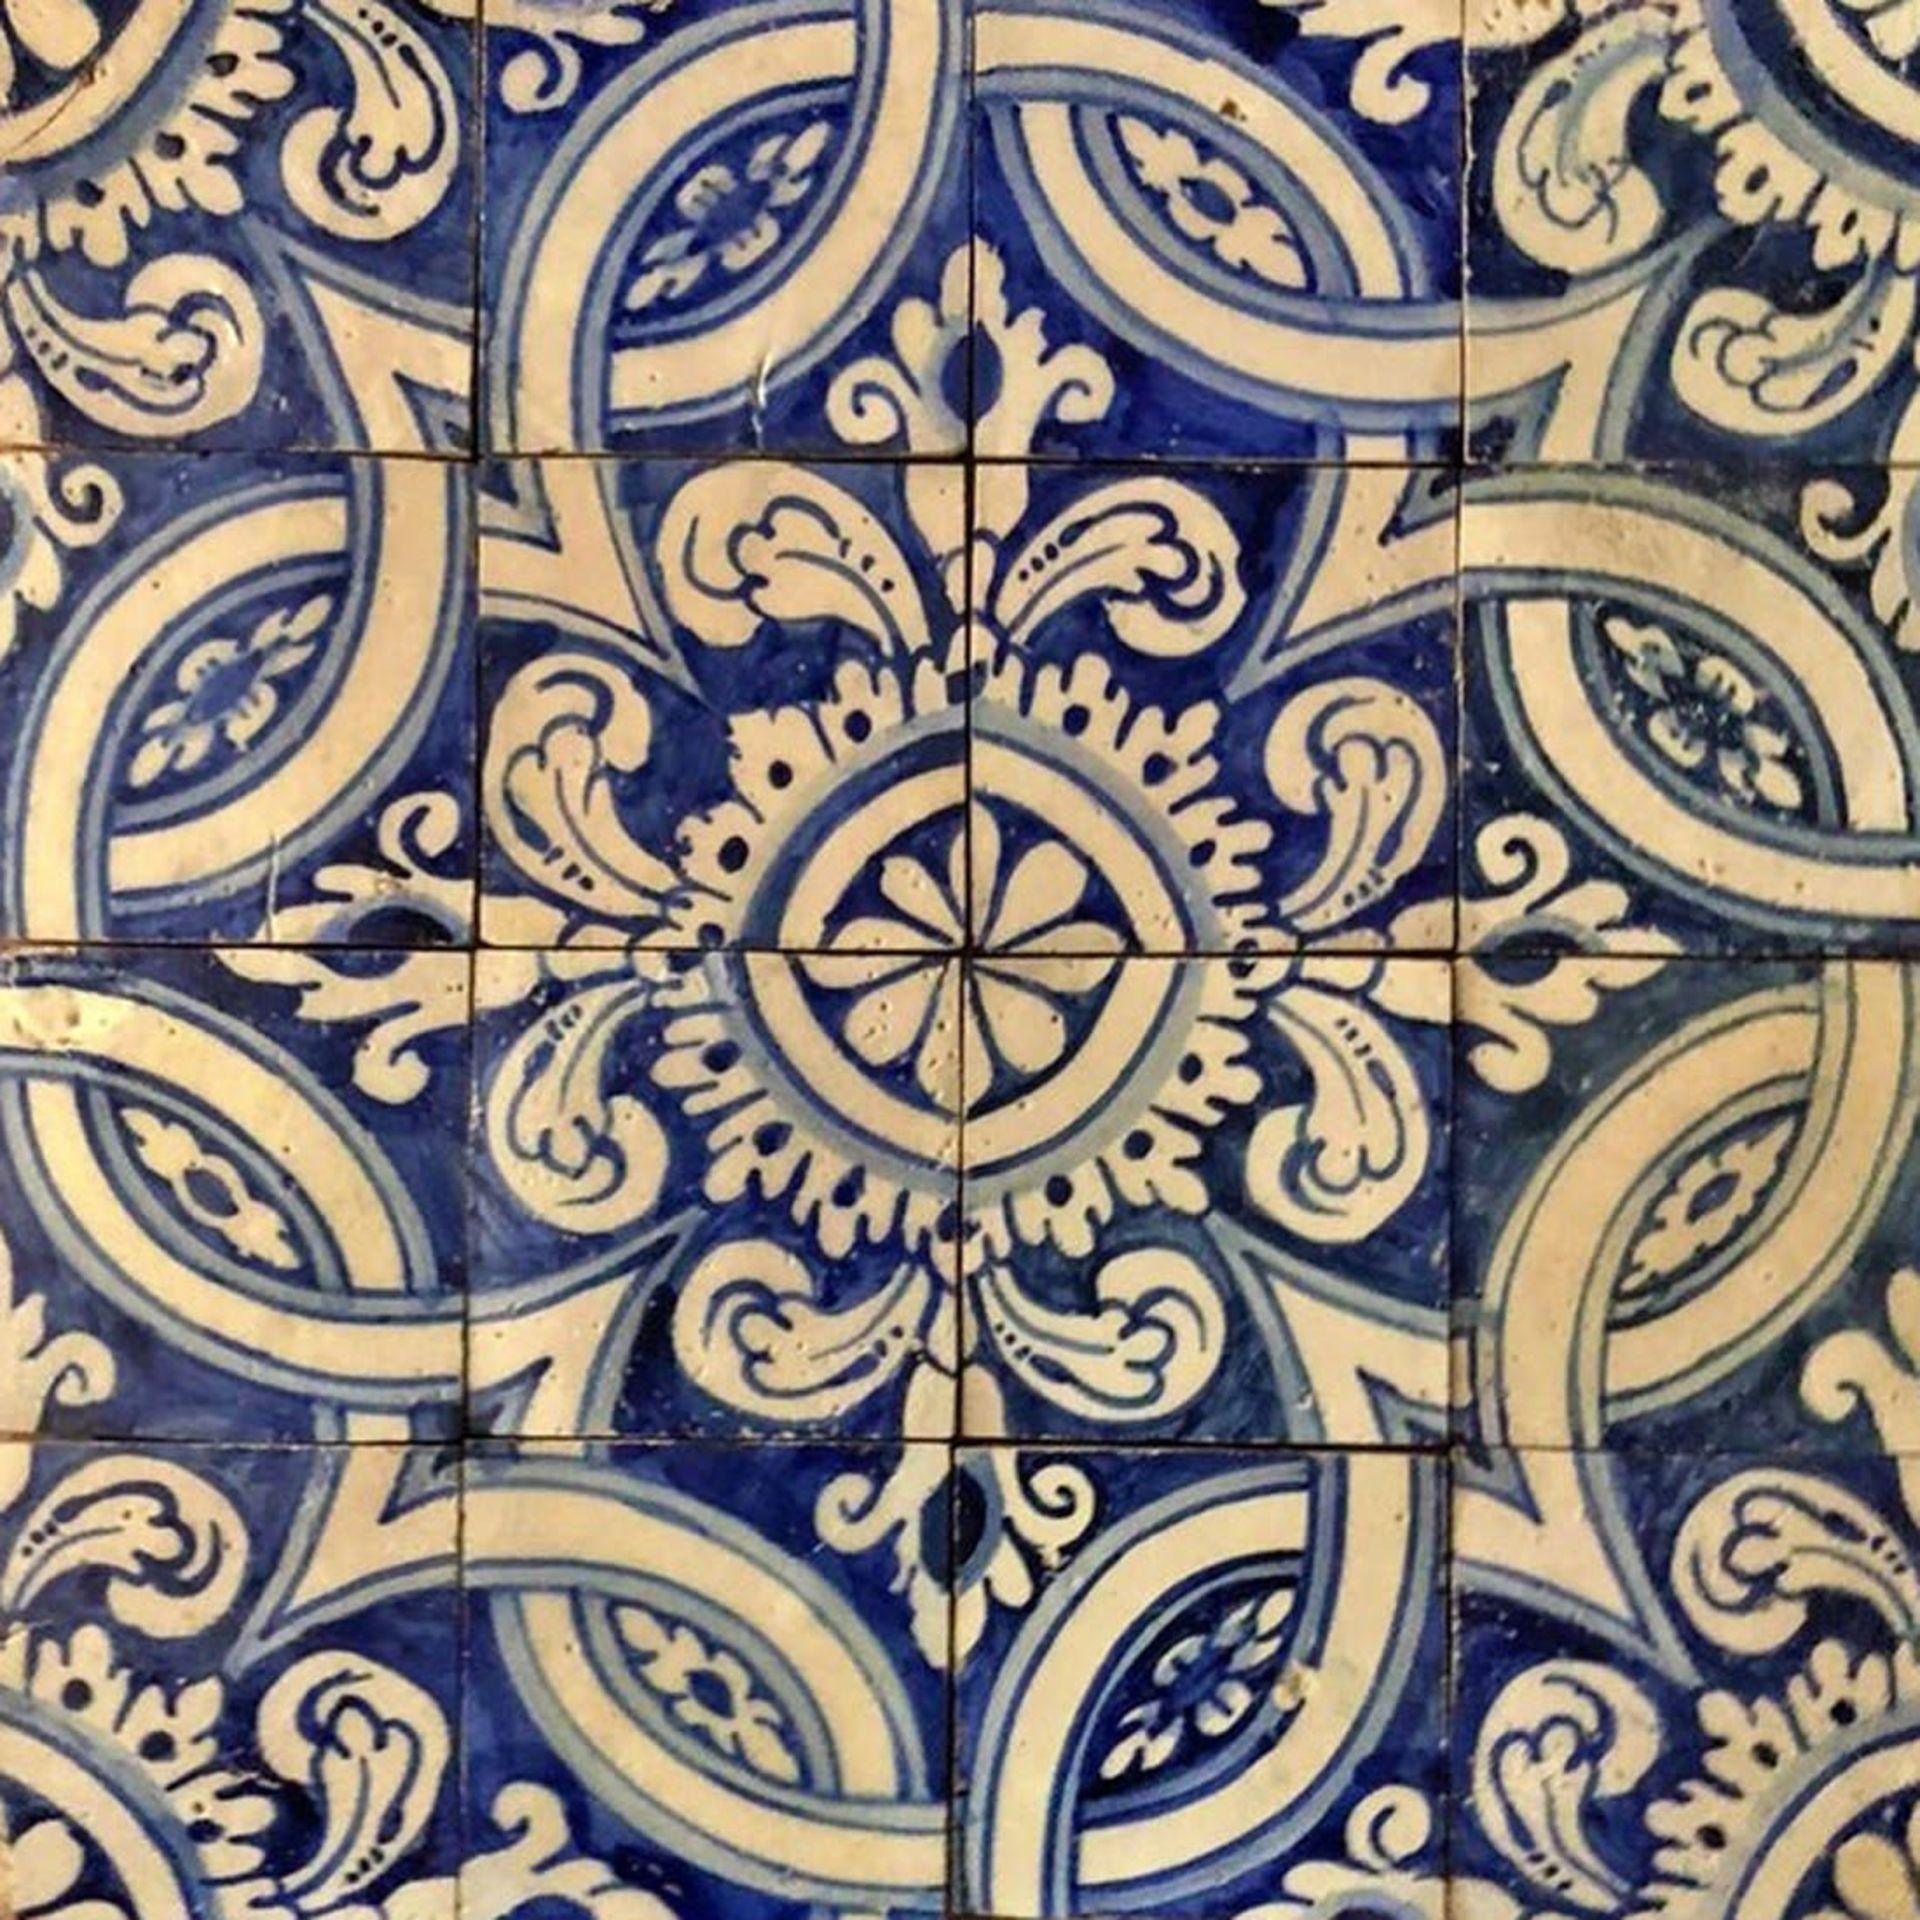 Panel of Portuguese Azulejos from the 17th century